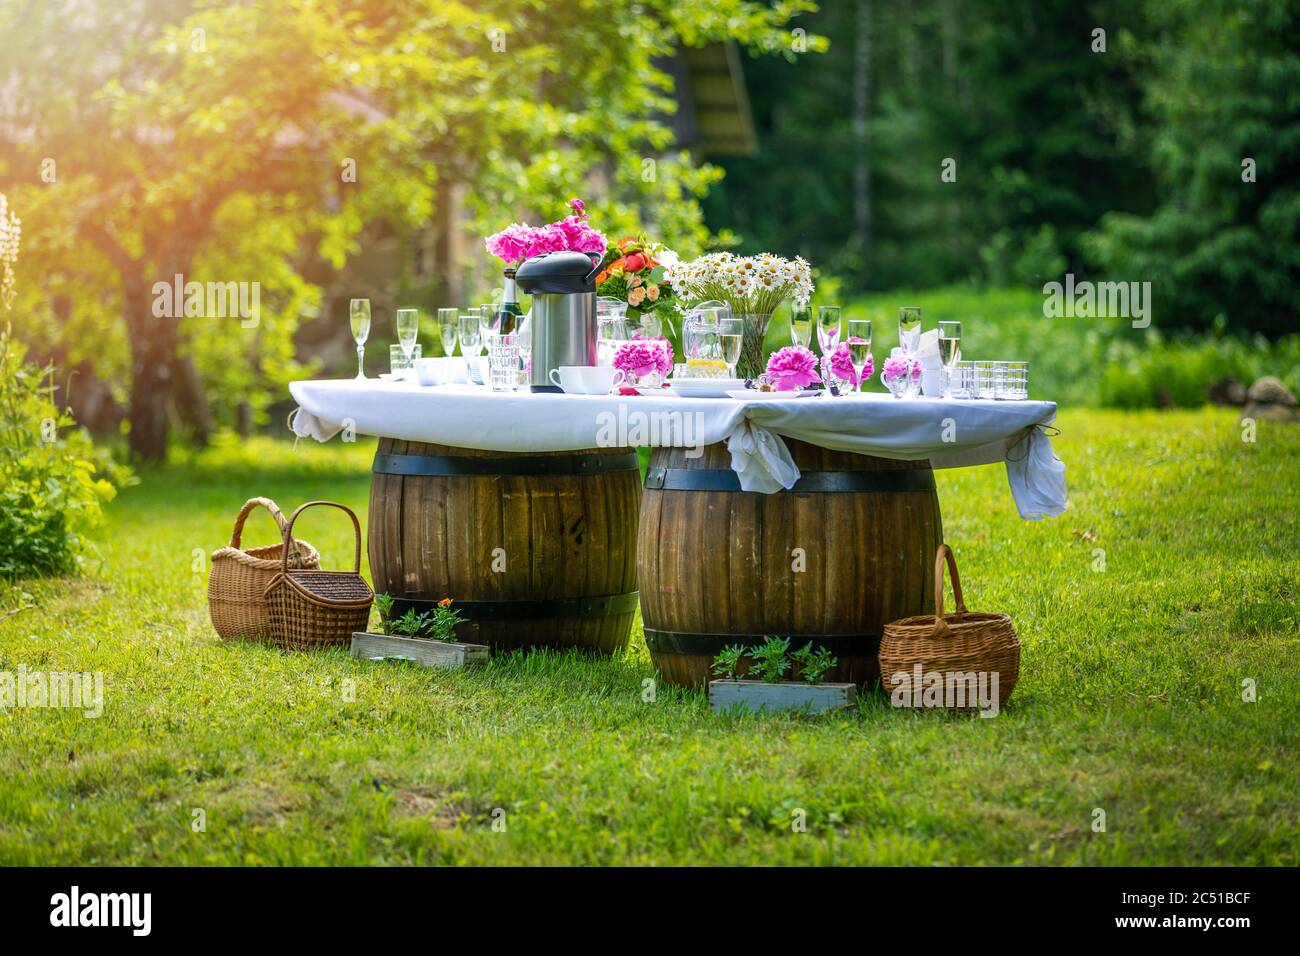 beautiful banquet buffet table decorated in rustic style in the garden Stock Photo